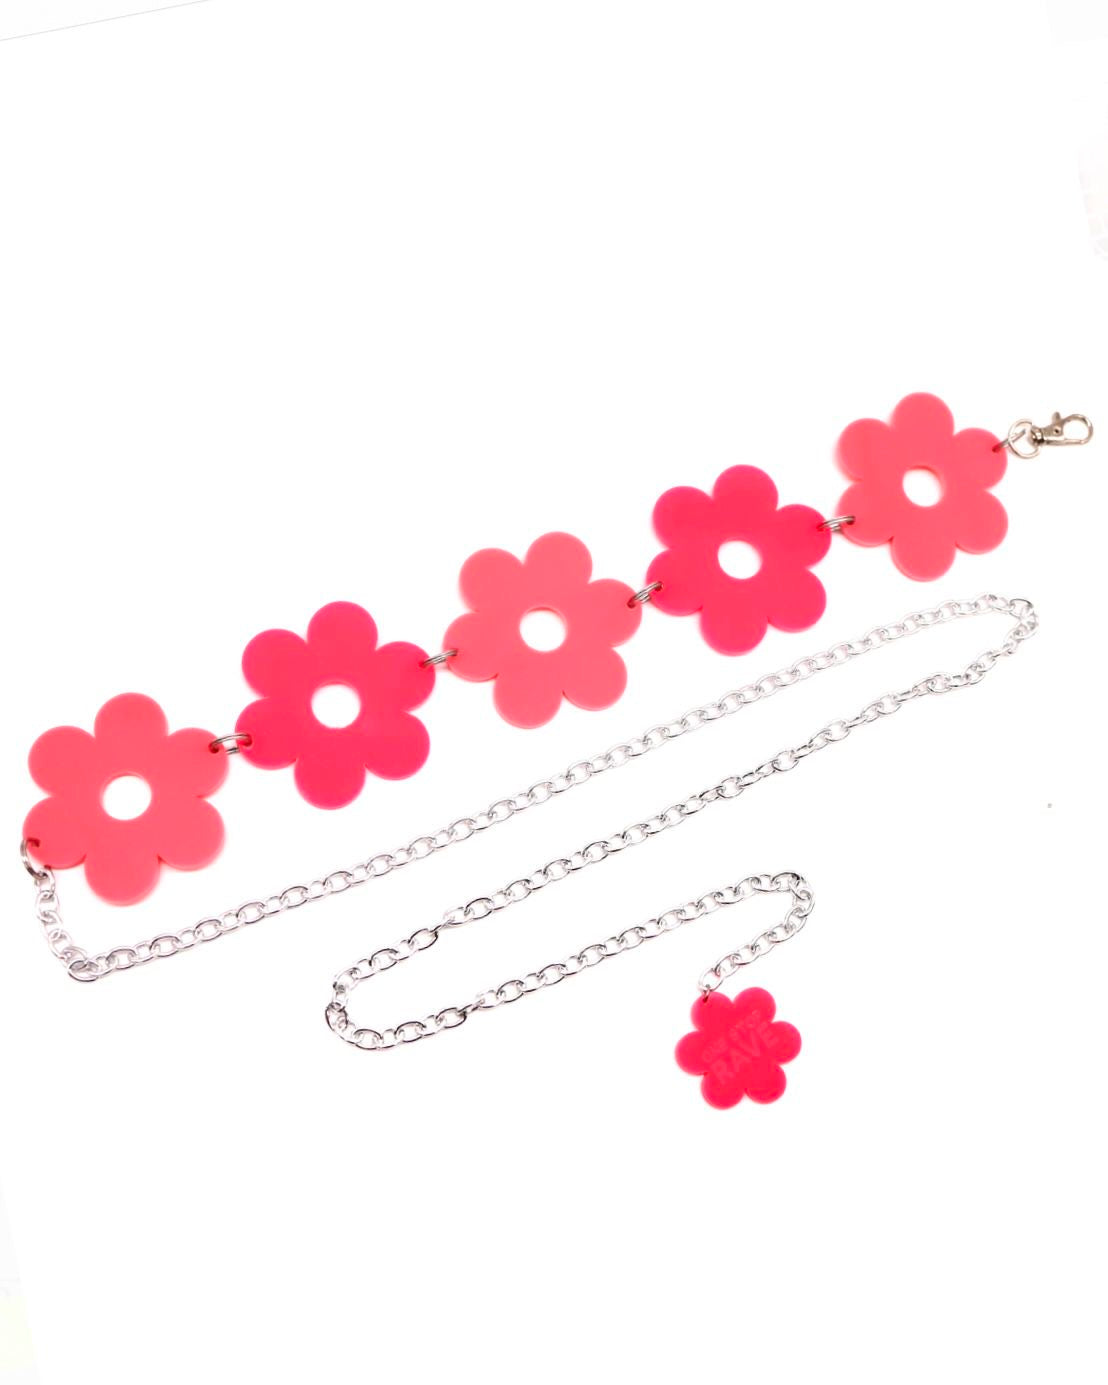 Flower Power Pink Belt featuring a silver chain with alternating light and dark pink acrylic daisies.